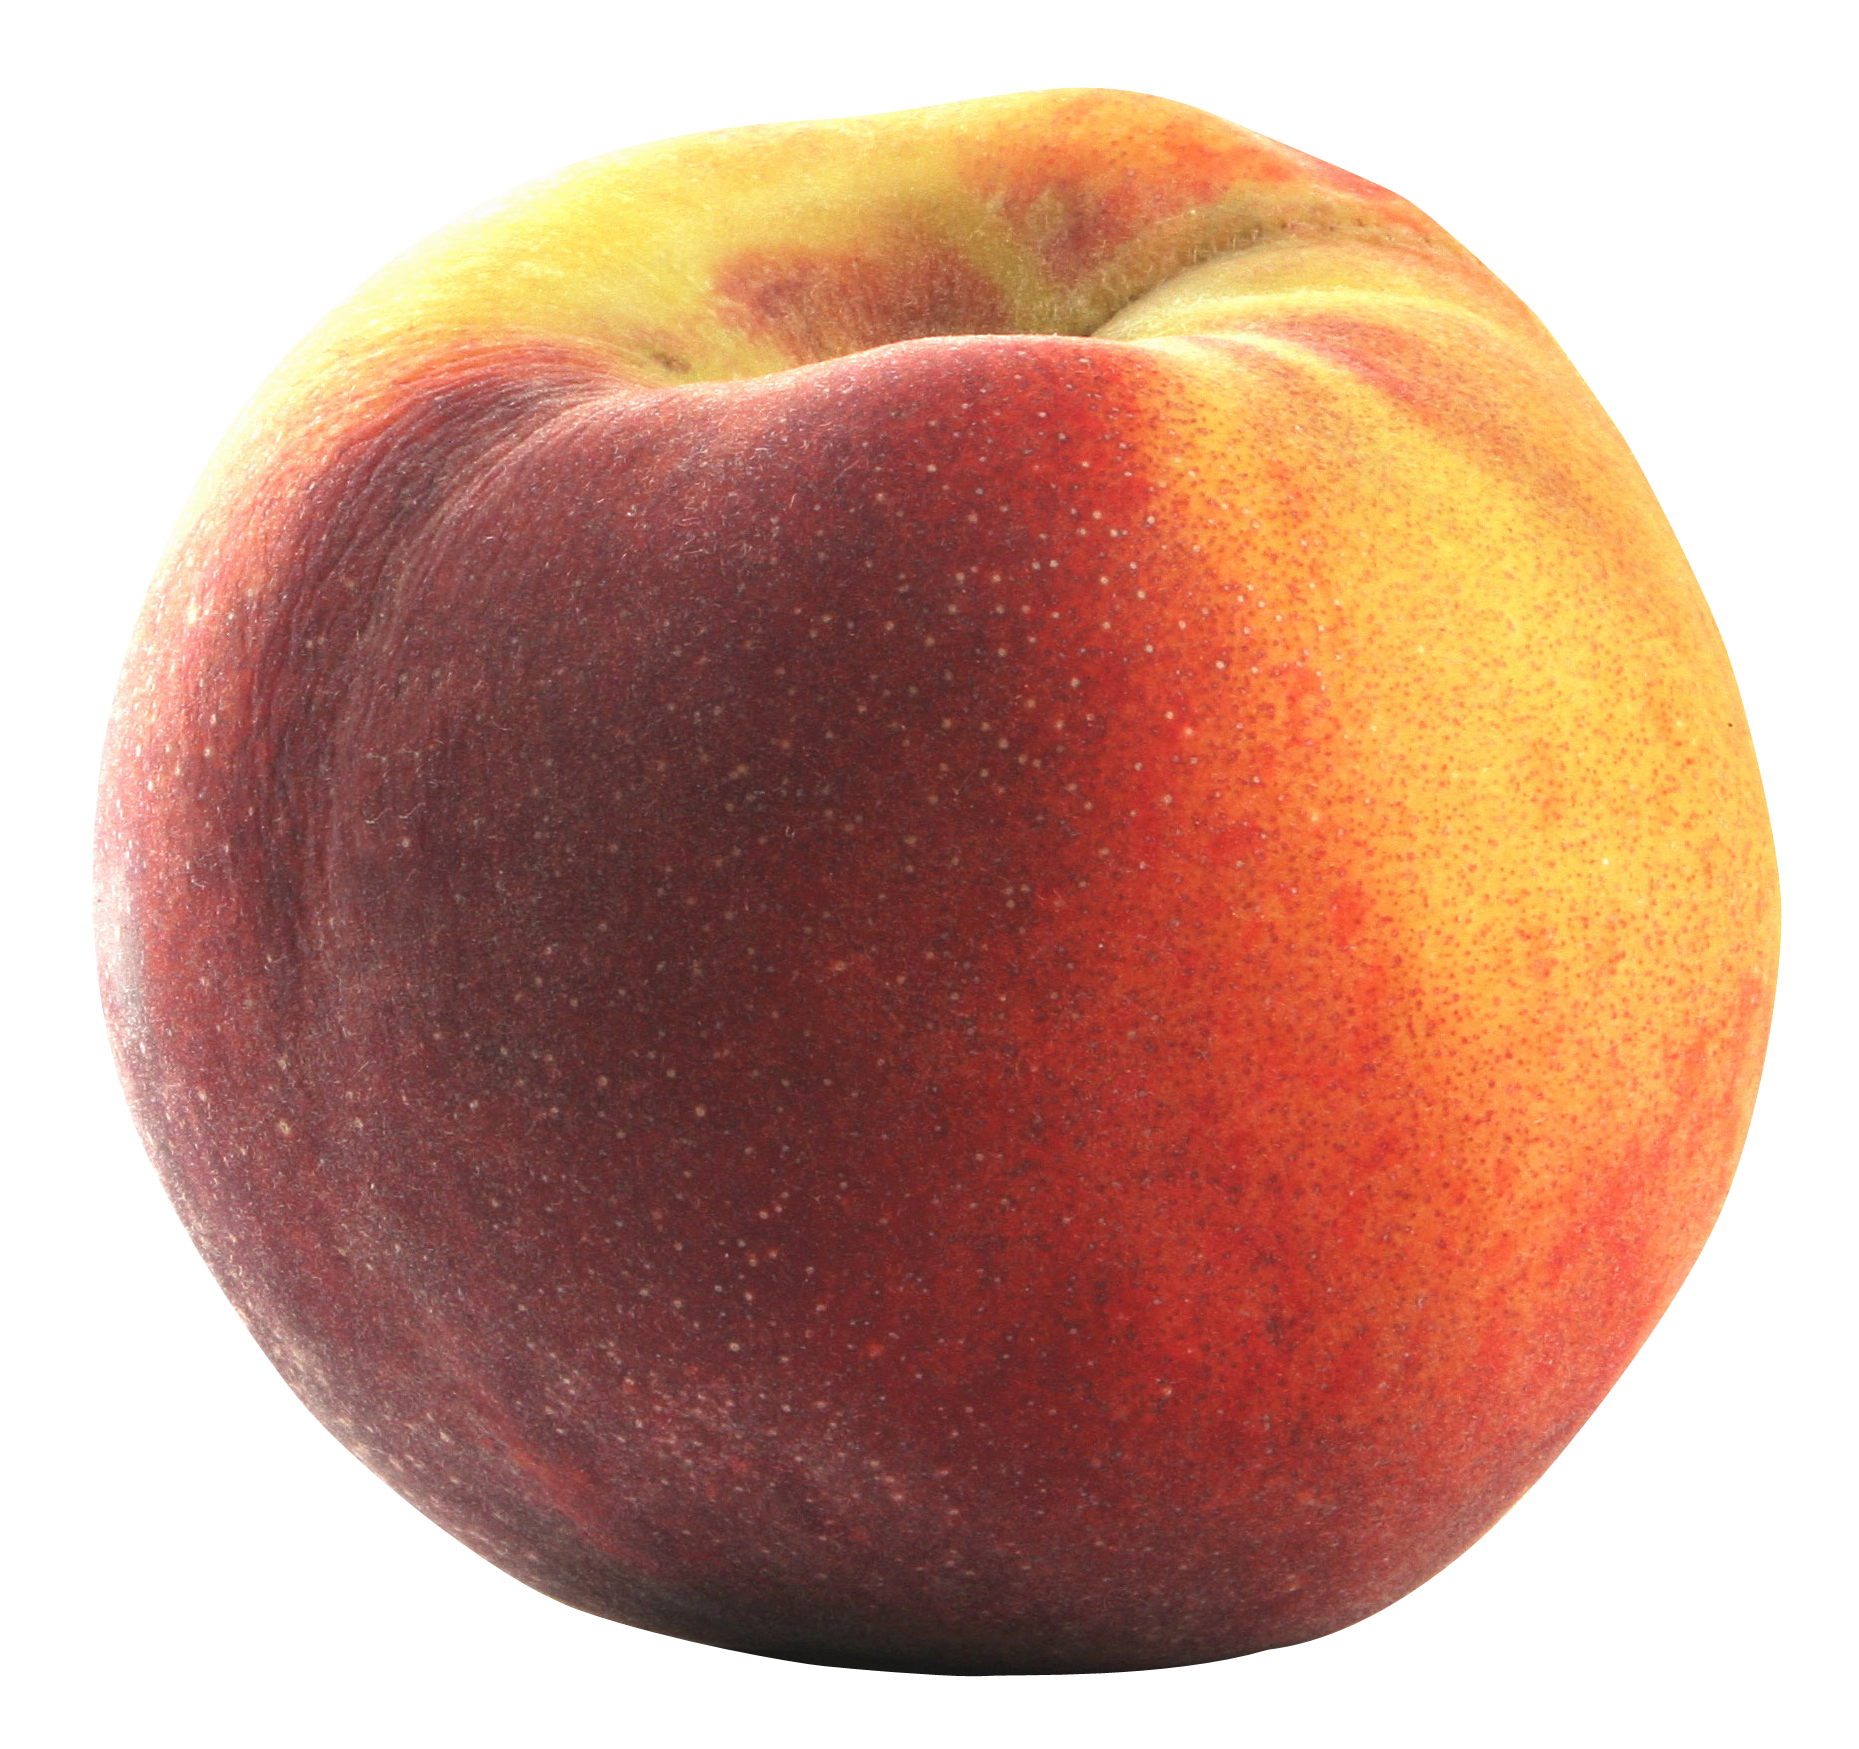 Peach PNG HD Images